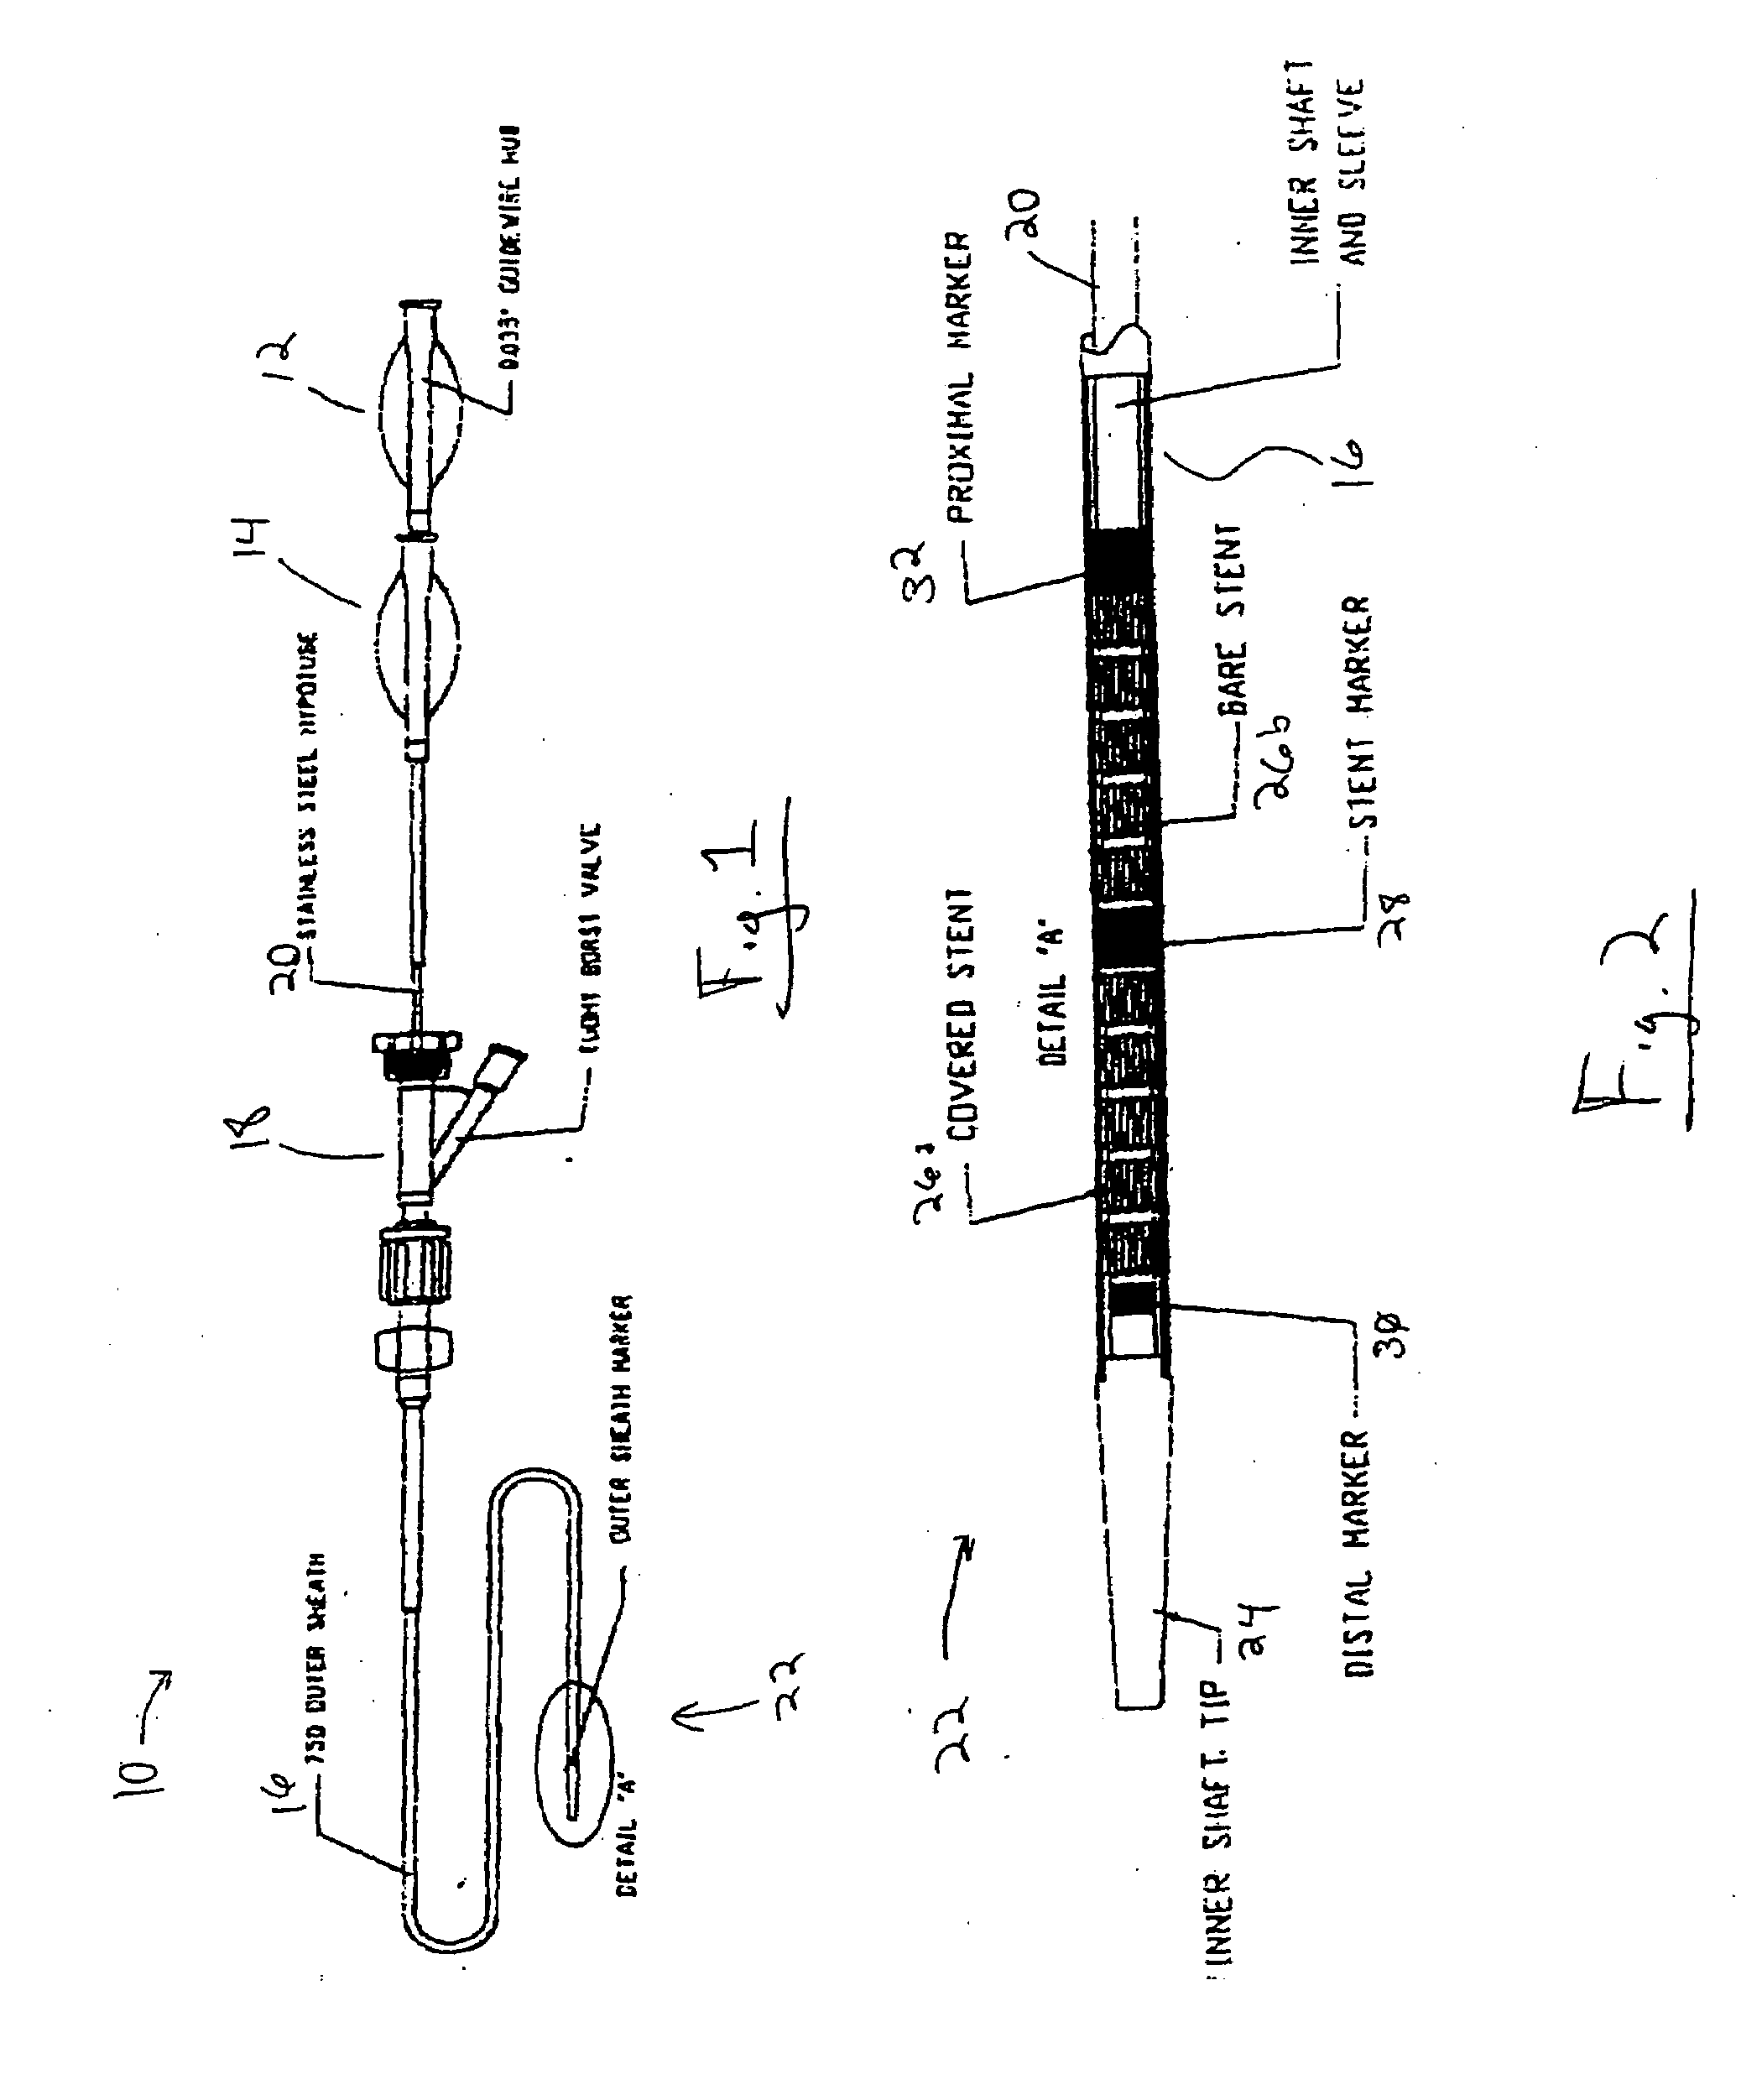 Multiple in vivo implant delivery device